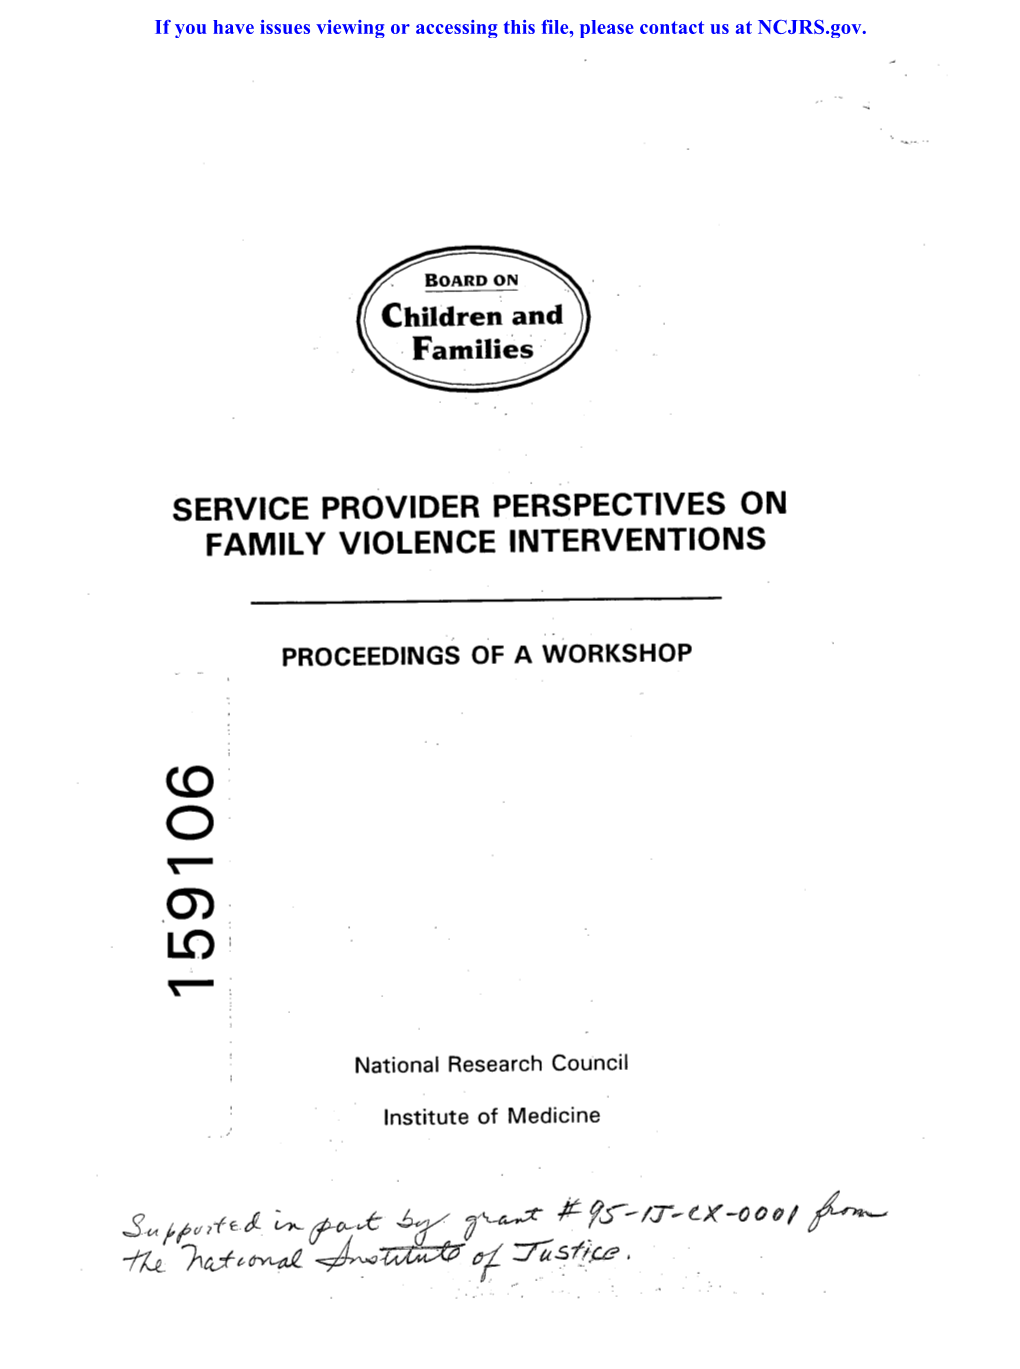 Service Provider Perspectives on Family Violence Interventions